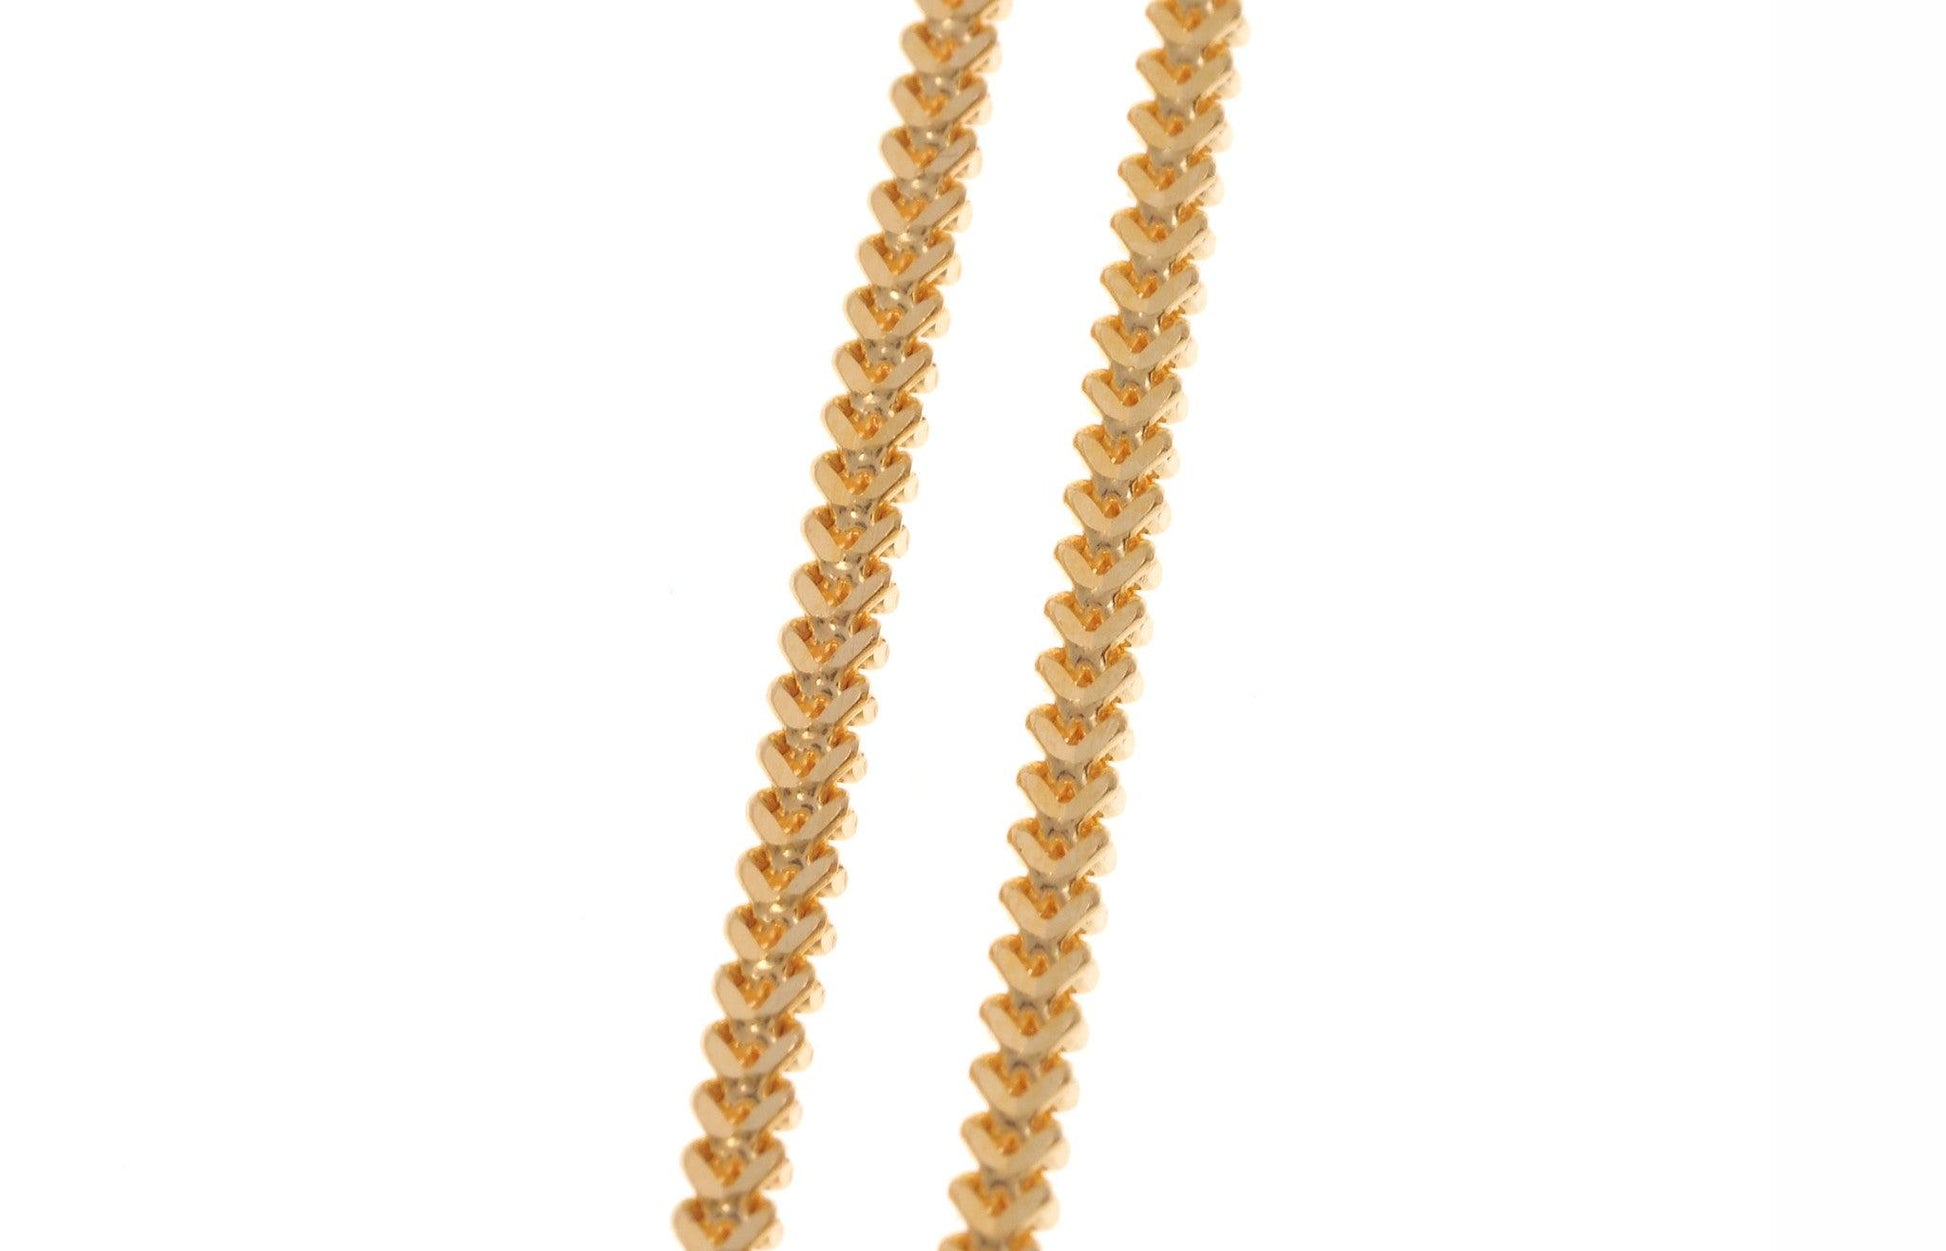 22ct Gold Unisex Foxtail Chain with a lobster clasp C-3796 - Minar Jewellers